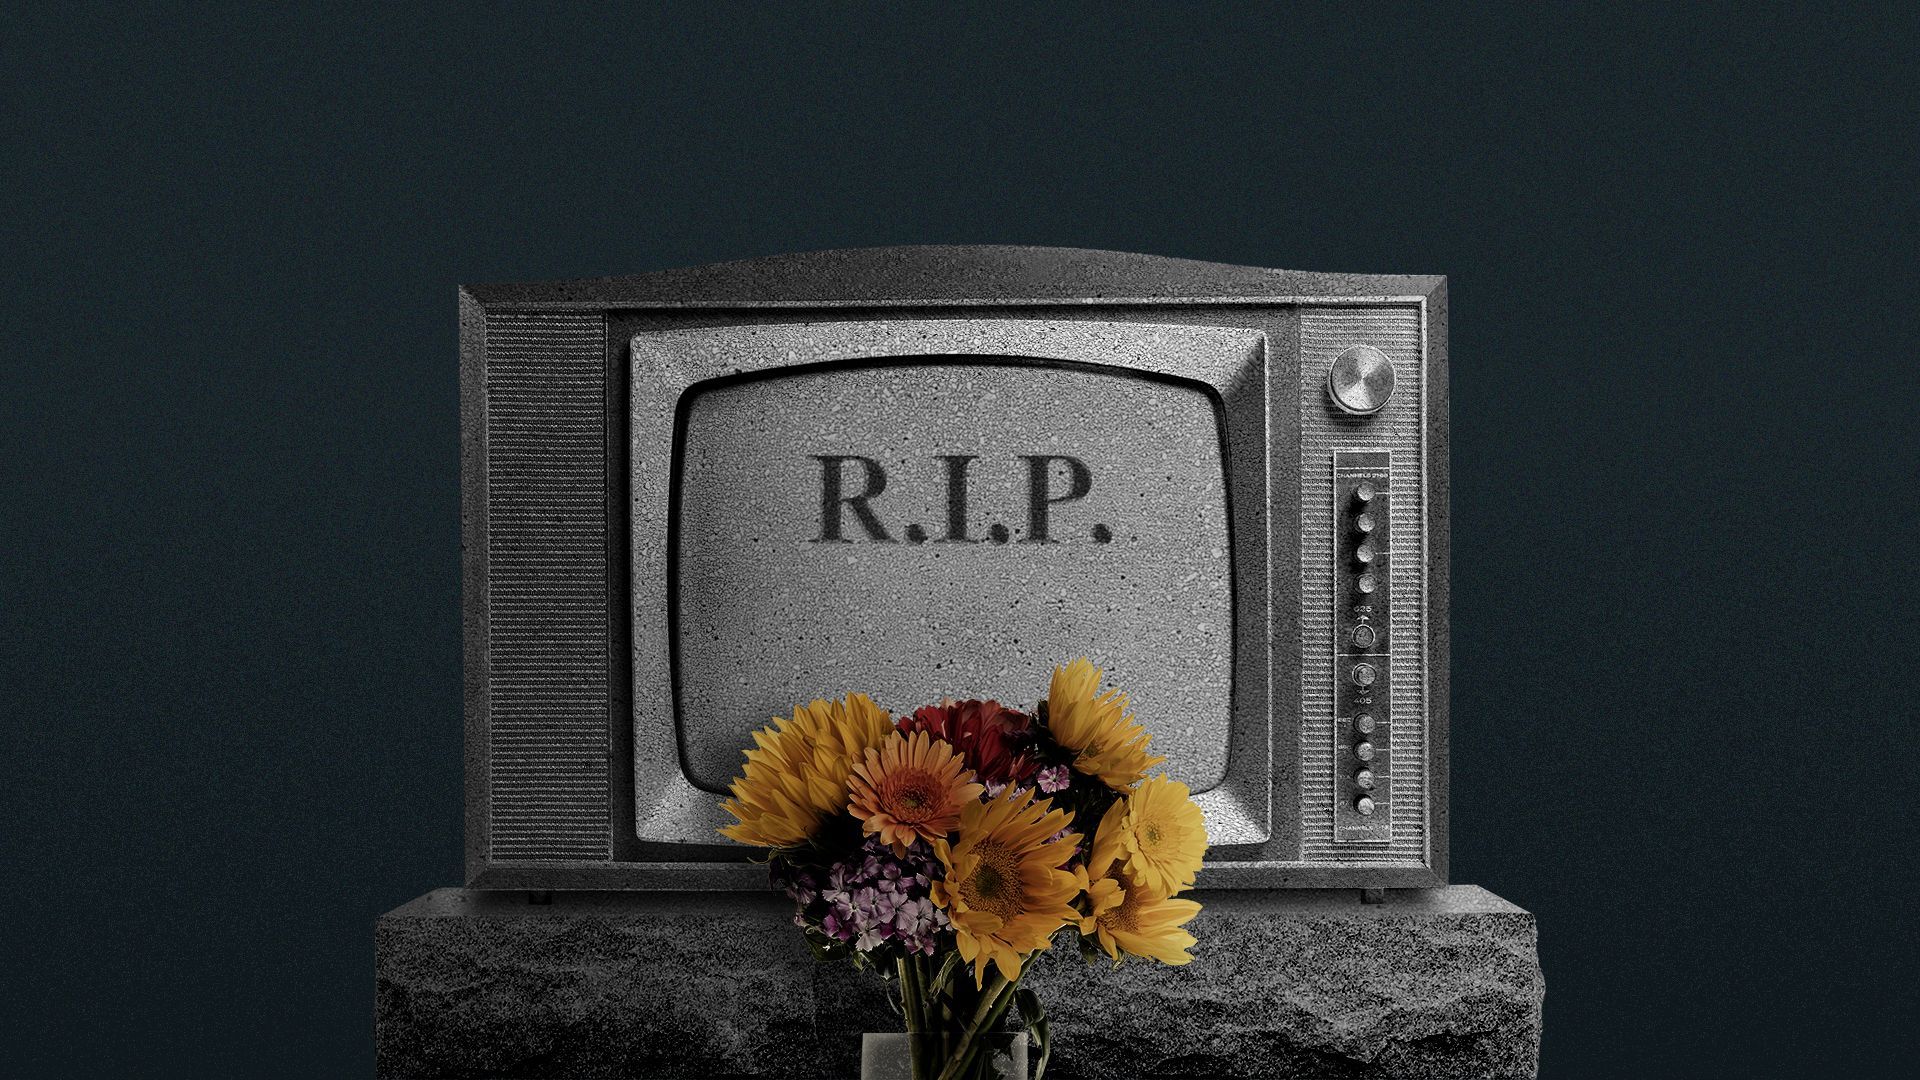 Illustration of a gravestone made out of a TV, with a bouquet of flowers sitting in front of it.